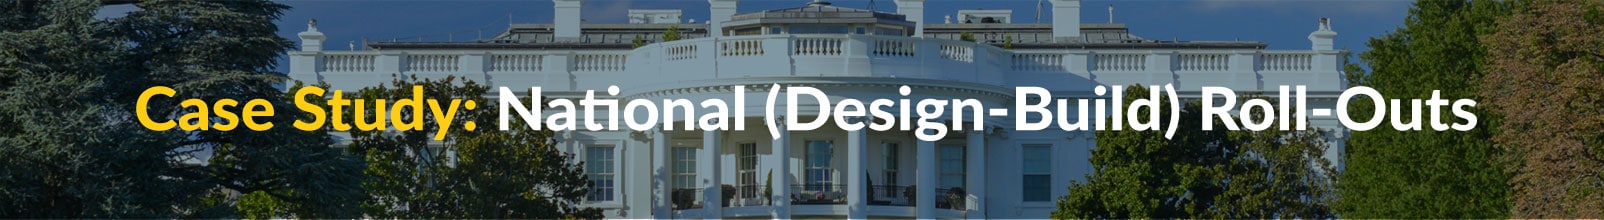 Case Study: National (Design-Build) Roll-Outs